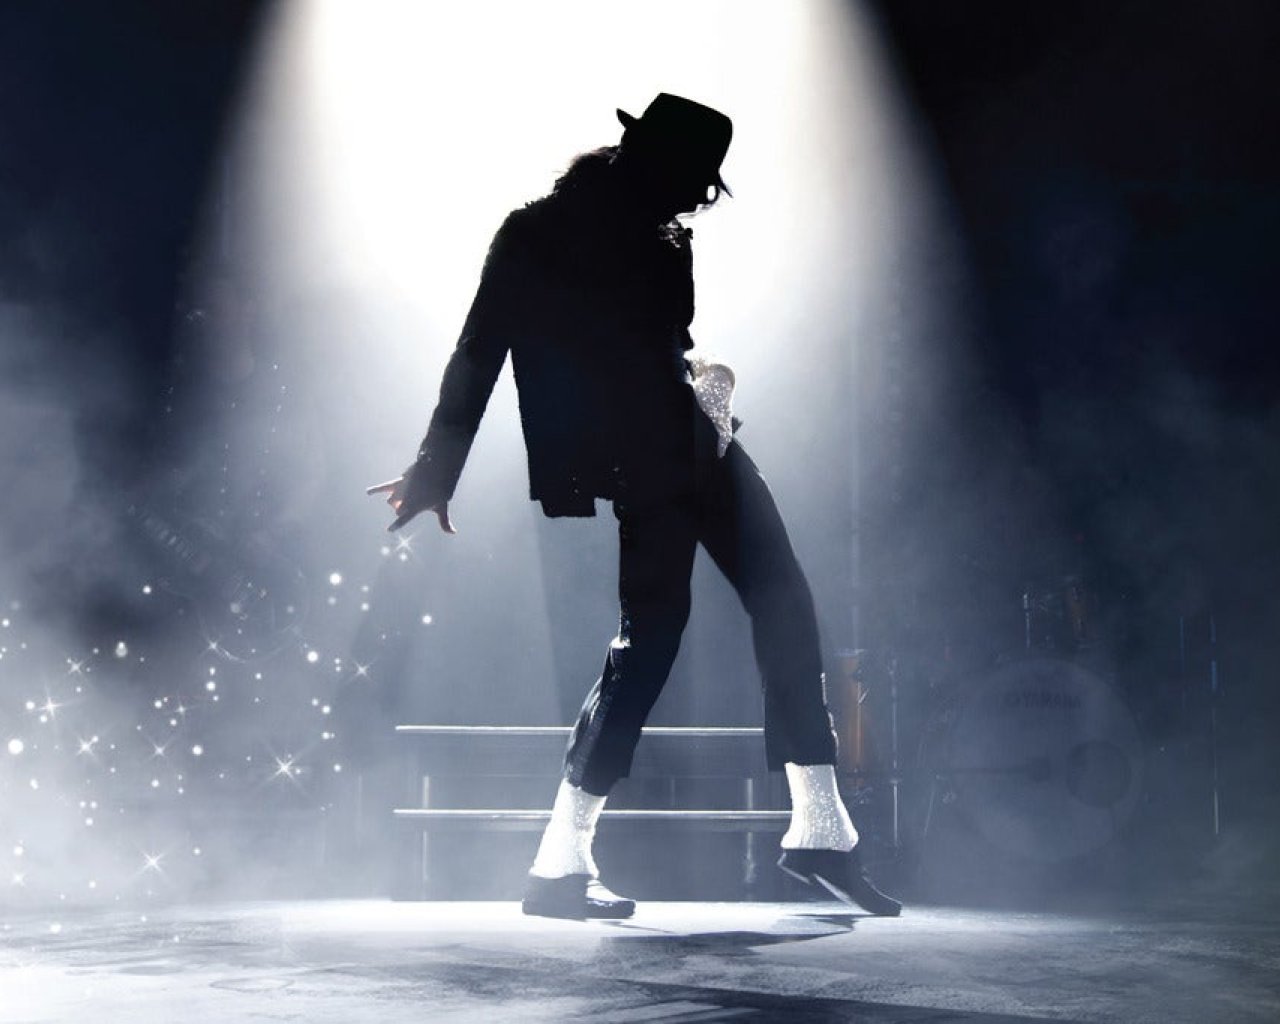 The King Of Pop Show - Michael Jackson Live Concert Experience